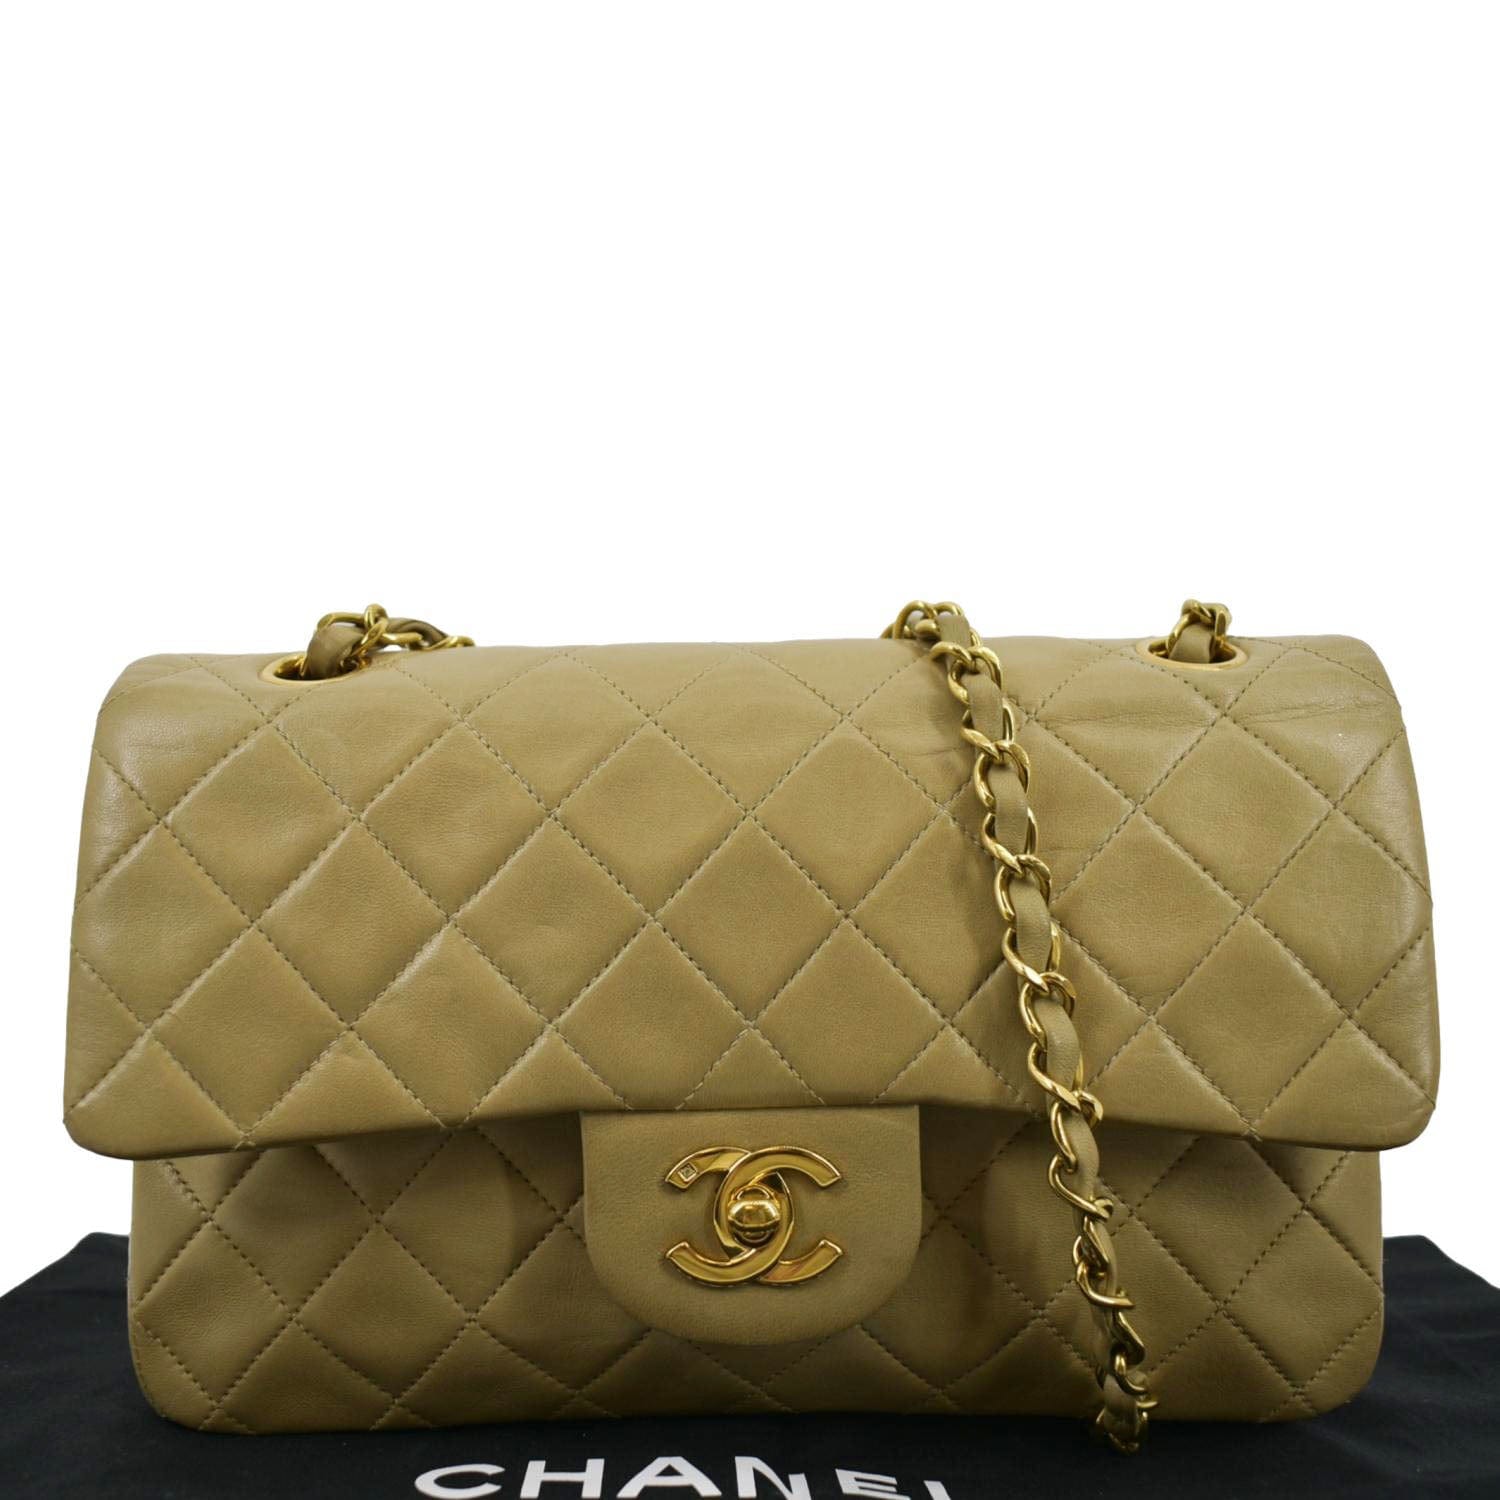 CHANEL Classic Double Flap Leather Shoulder Bag Taupe